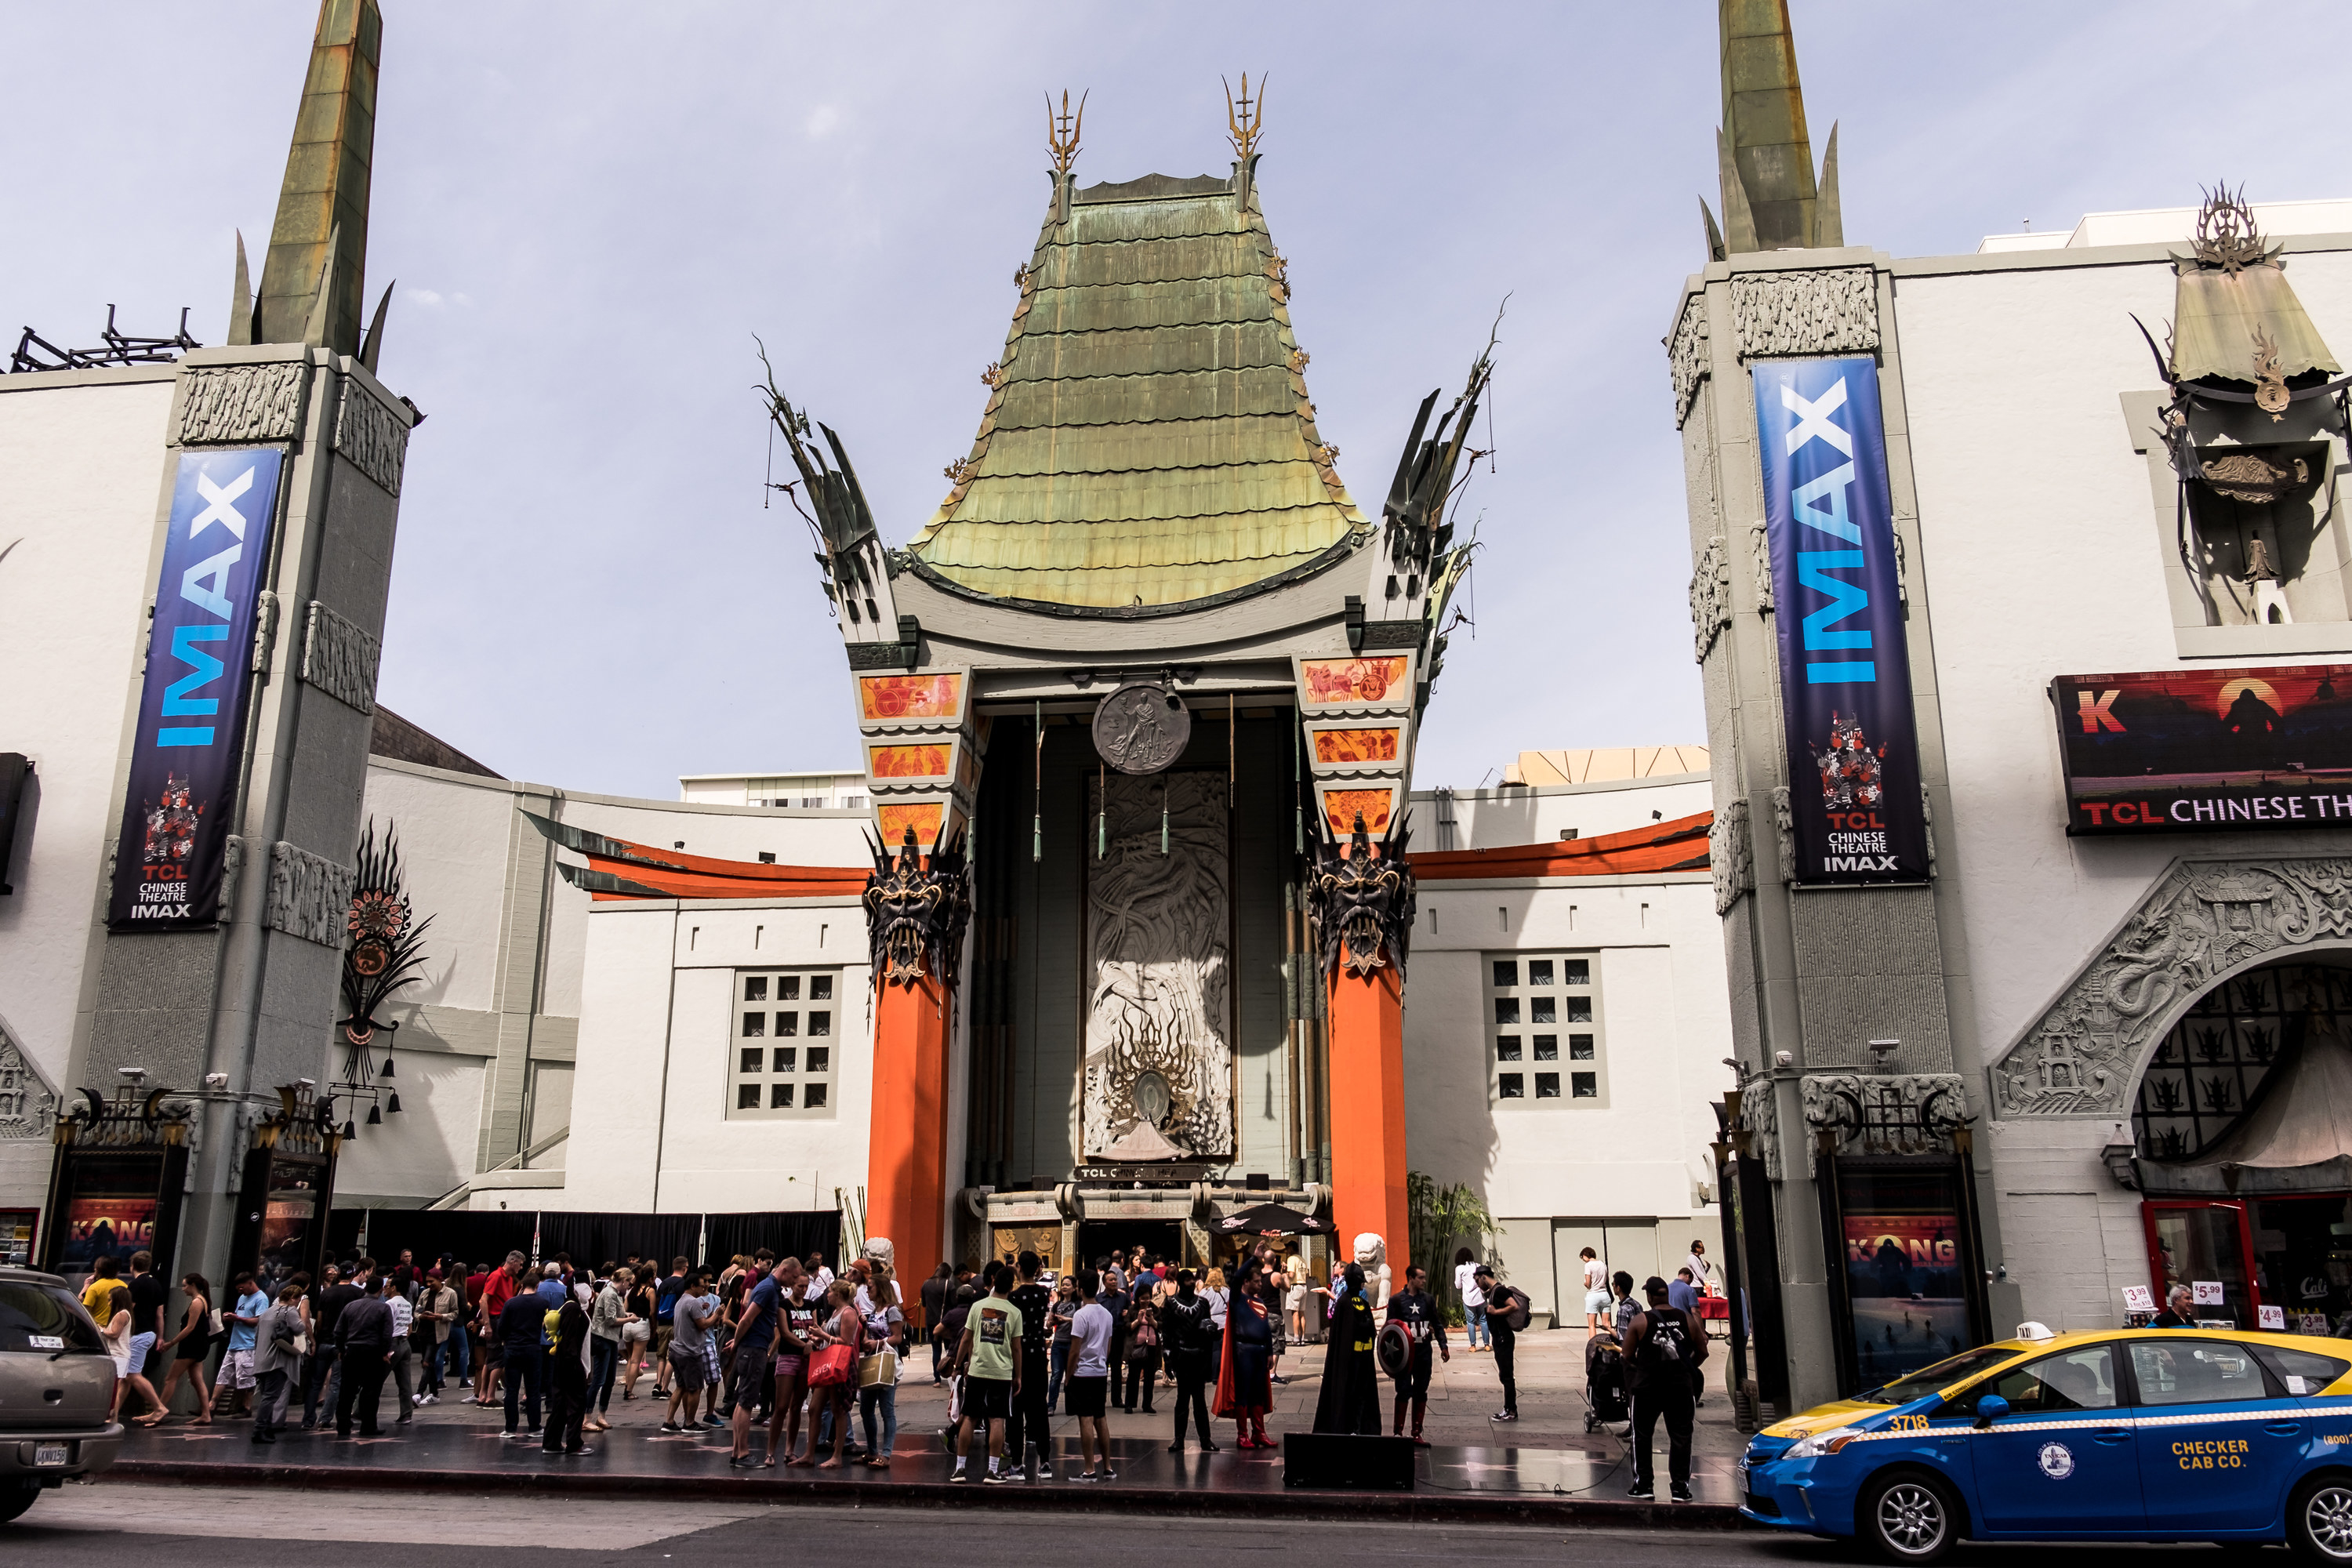 A crowd of people waiting the opening of the TCL Chinese Theater in Los Angeles